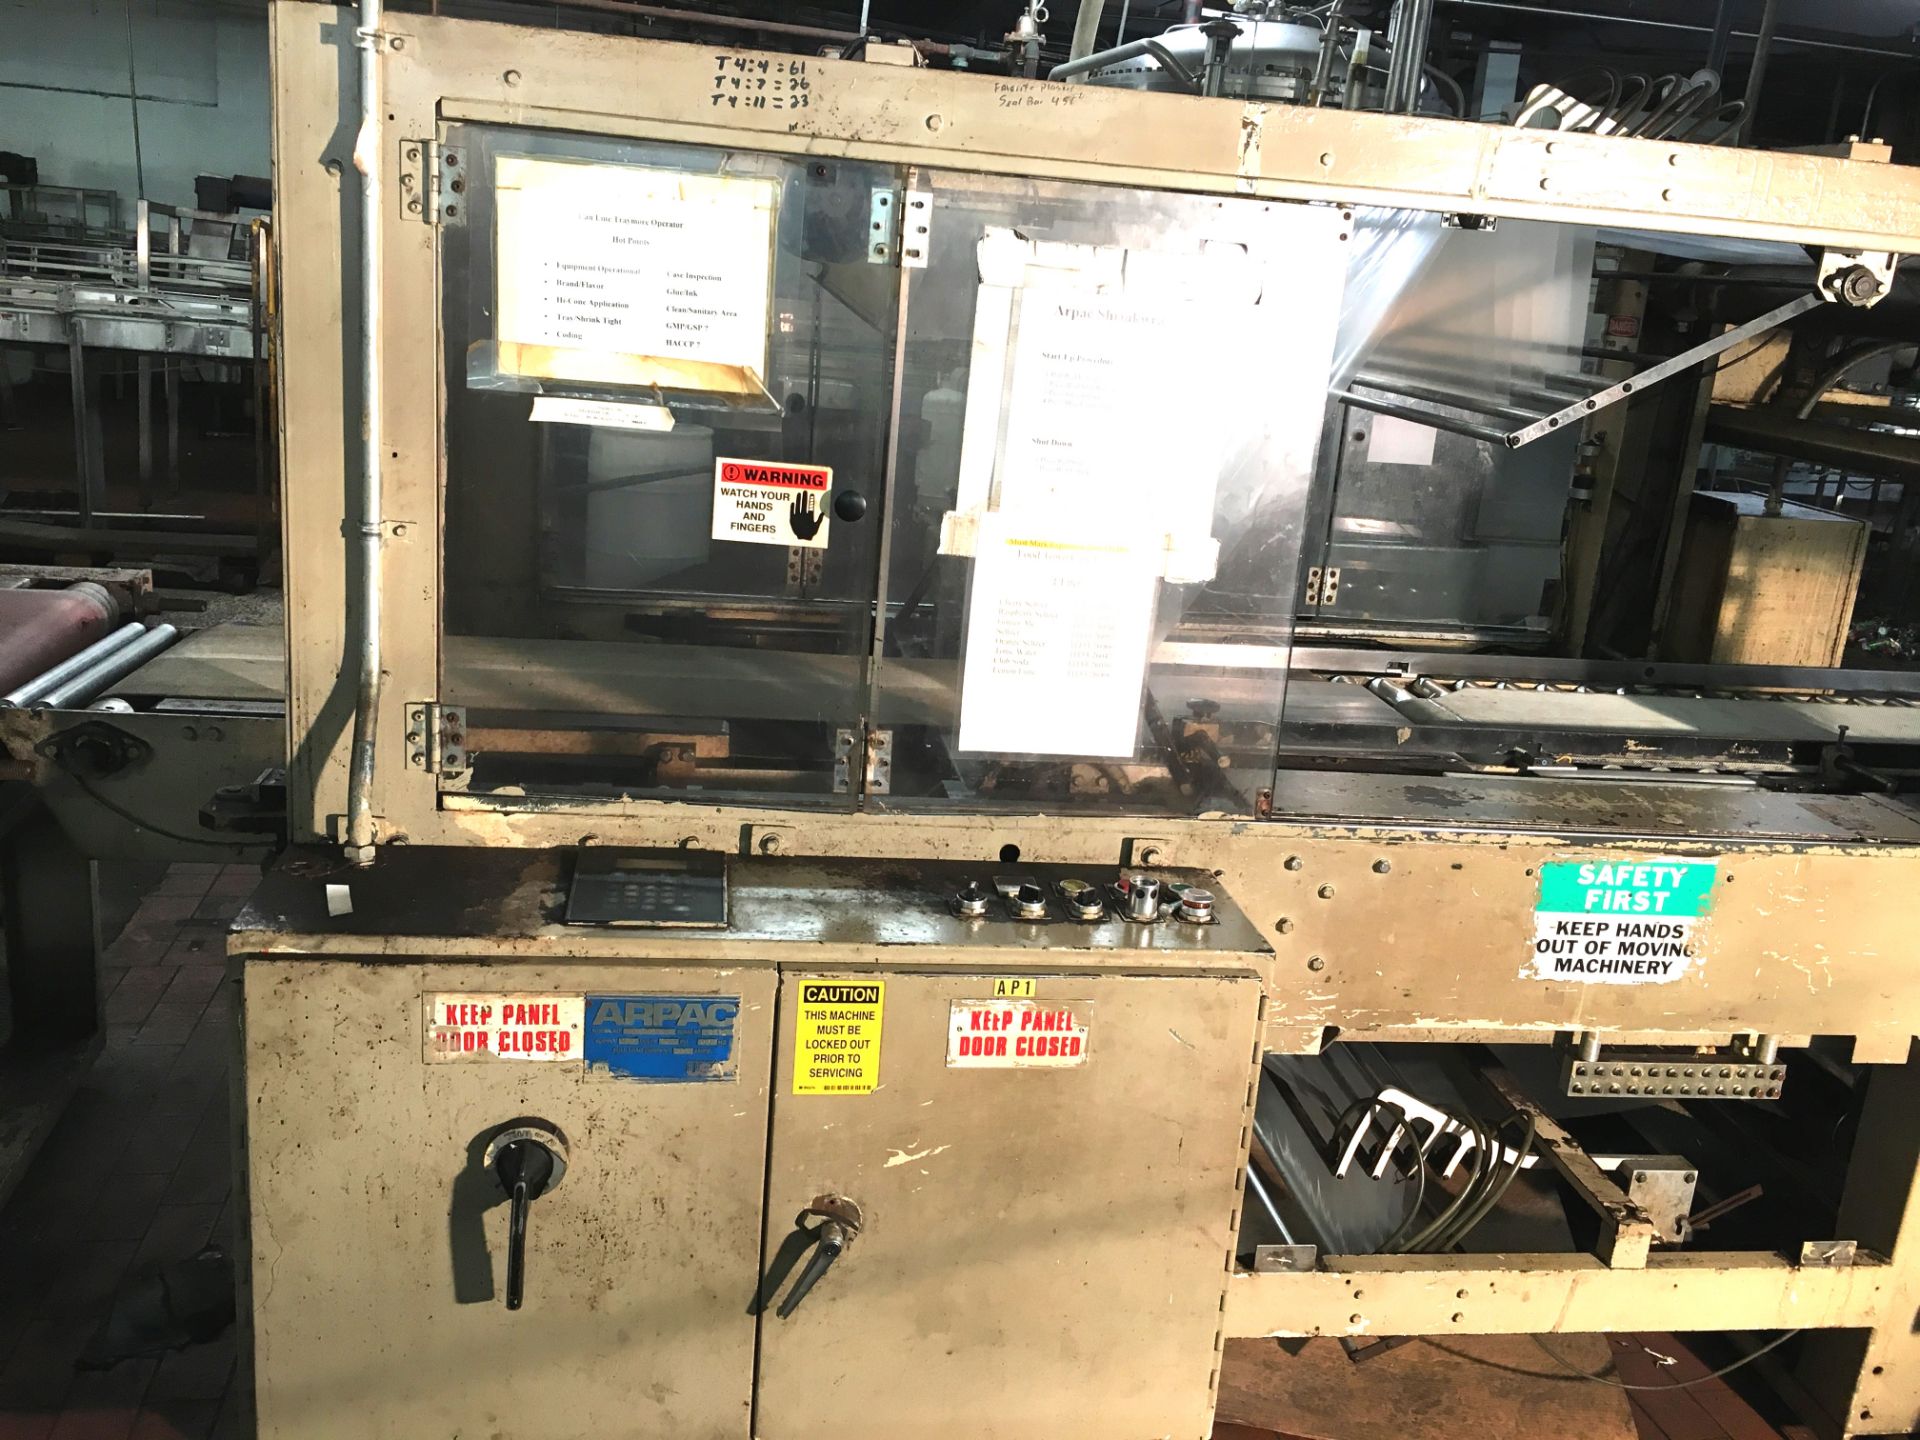 Arpac Tray Shrink Wrapper Model: 60-28TW Serial: 2442, Heat Tunnel Model: 60-28 Serial: 2436 Clear - Image 4 of 26